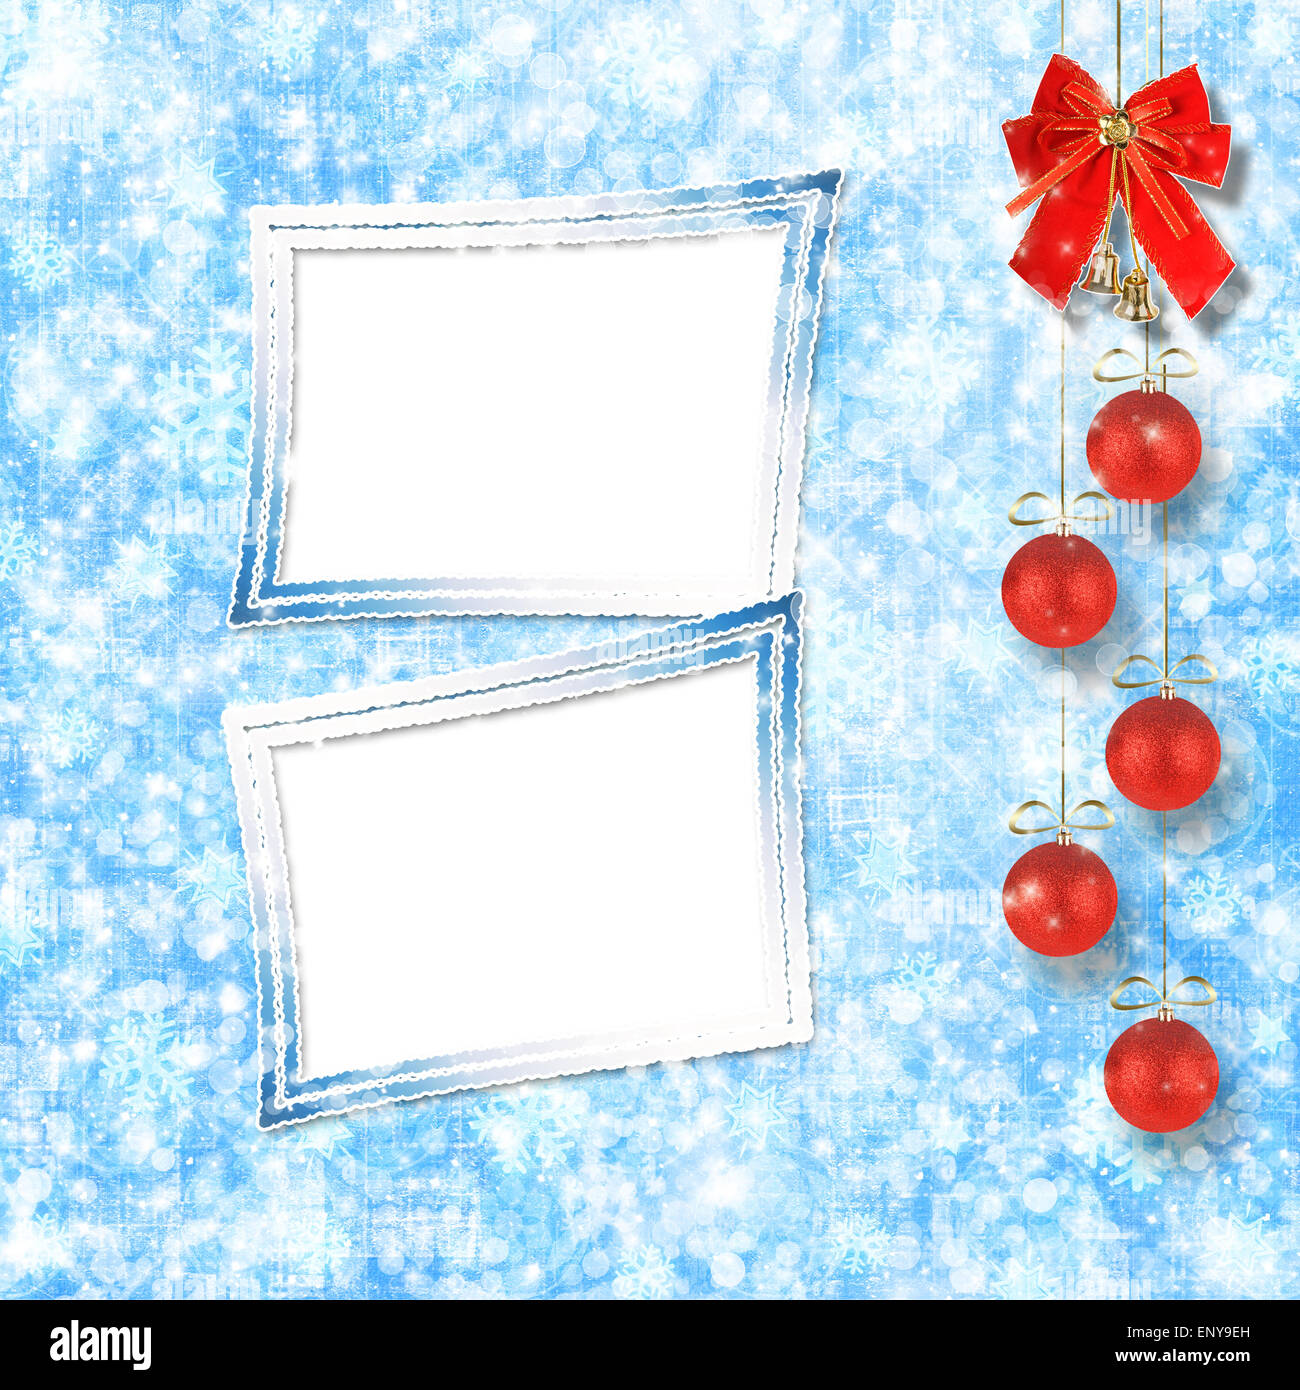 Christmas balls and red bow with bells on abstract snowy background Stock Photo